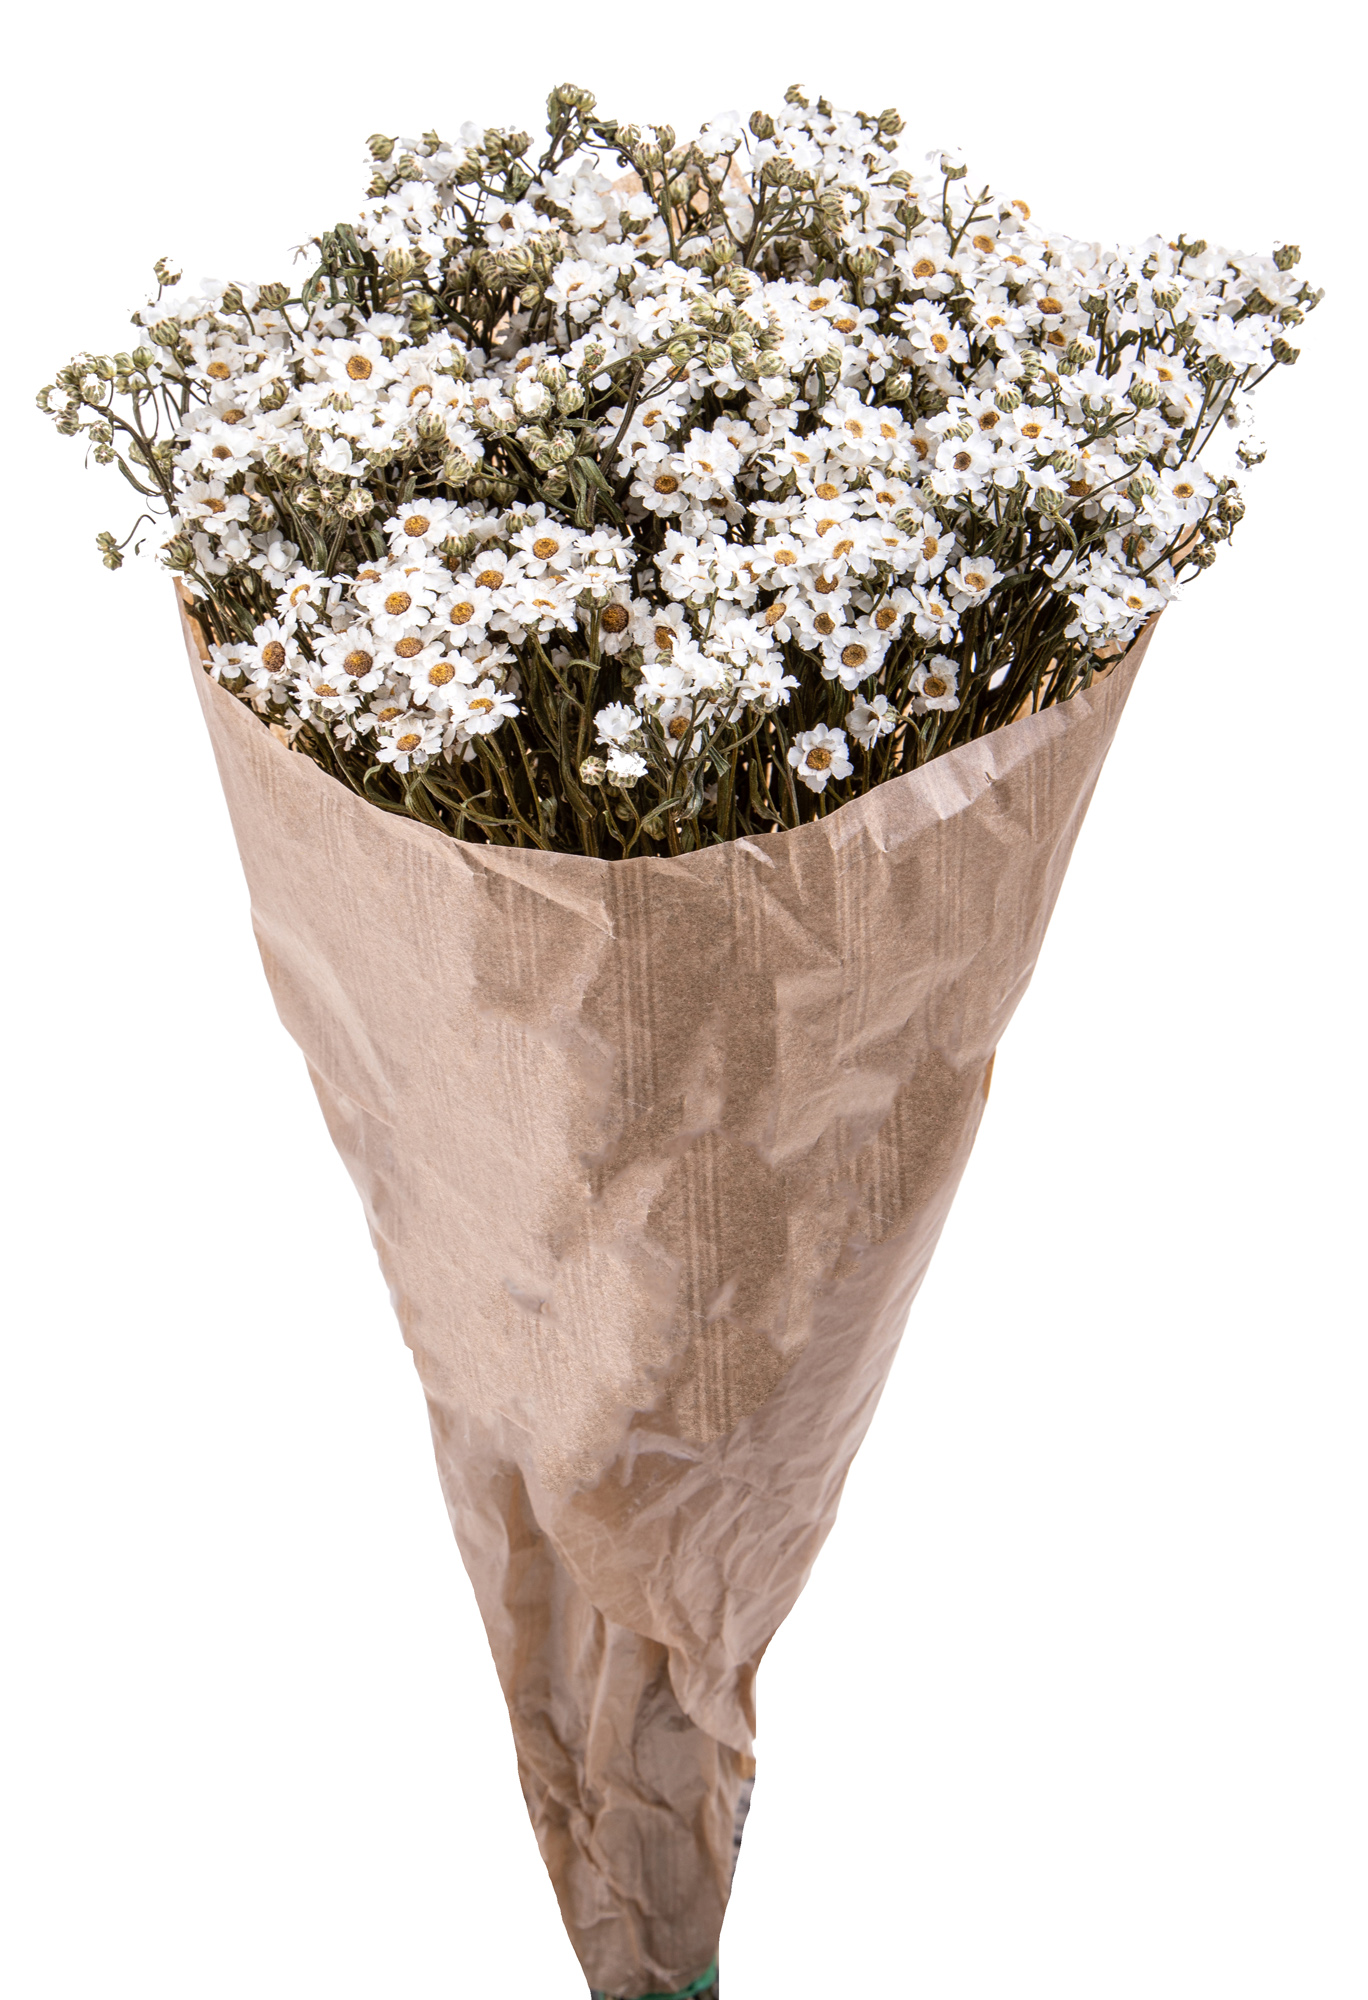 NATURAL PRODUCTS DRIED FLOWERS AND ERBS,IXODIA 30/35 CM 10 STELI